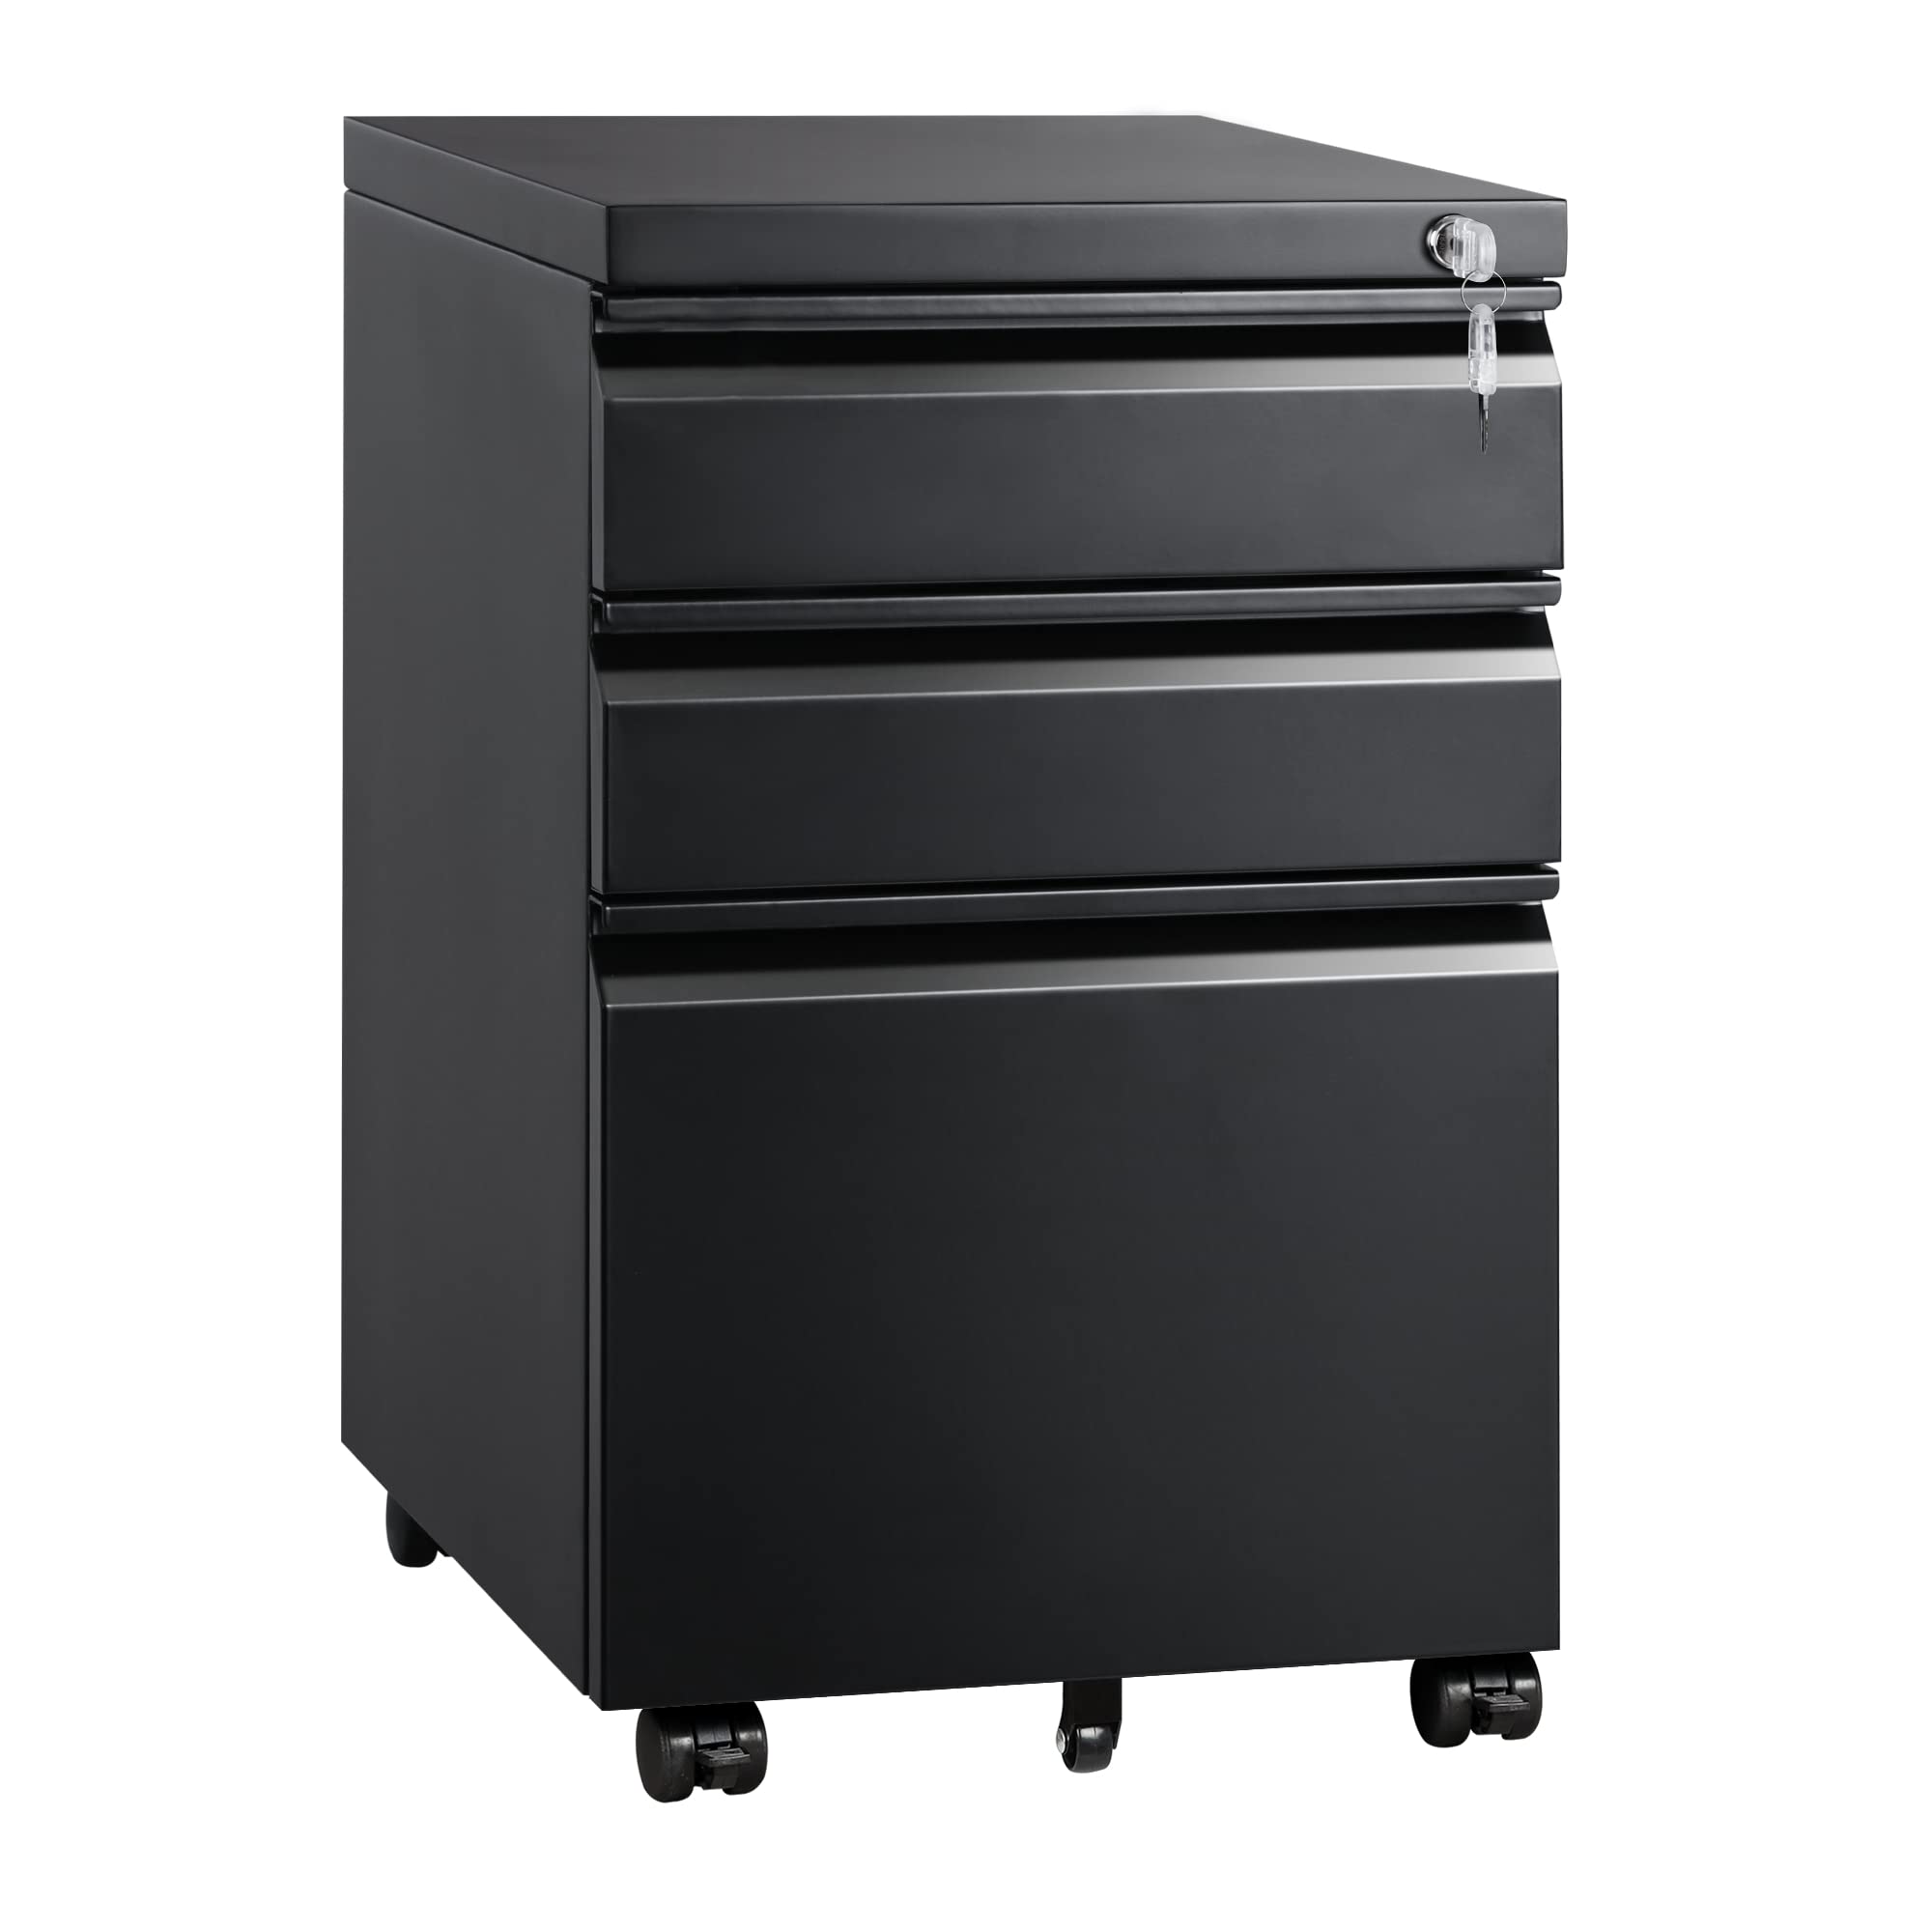 DEVAISE 3 Drawer Mobile File Cabinet with Lock, Metal Filing Cabinet for Legal/Letter/A4 Size, Fully Assembled Except Wheels